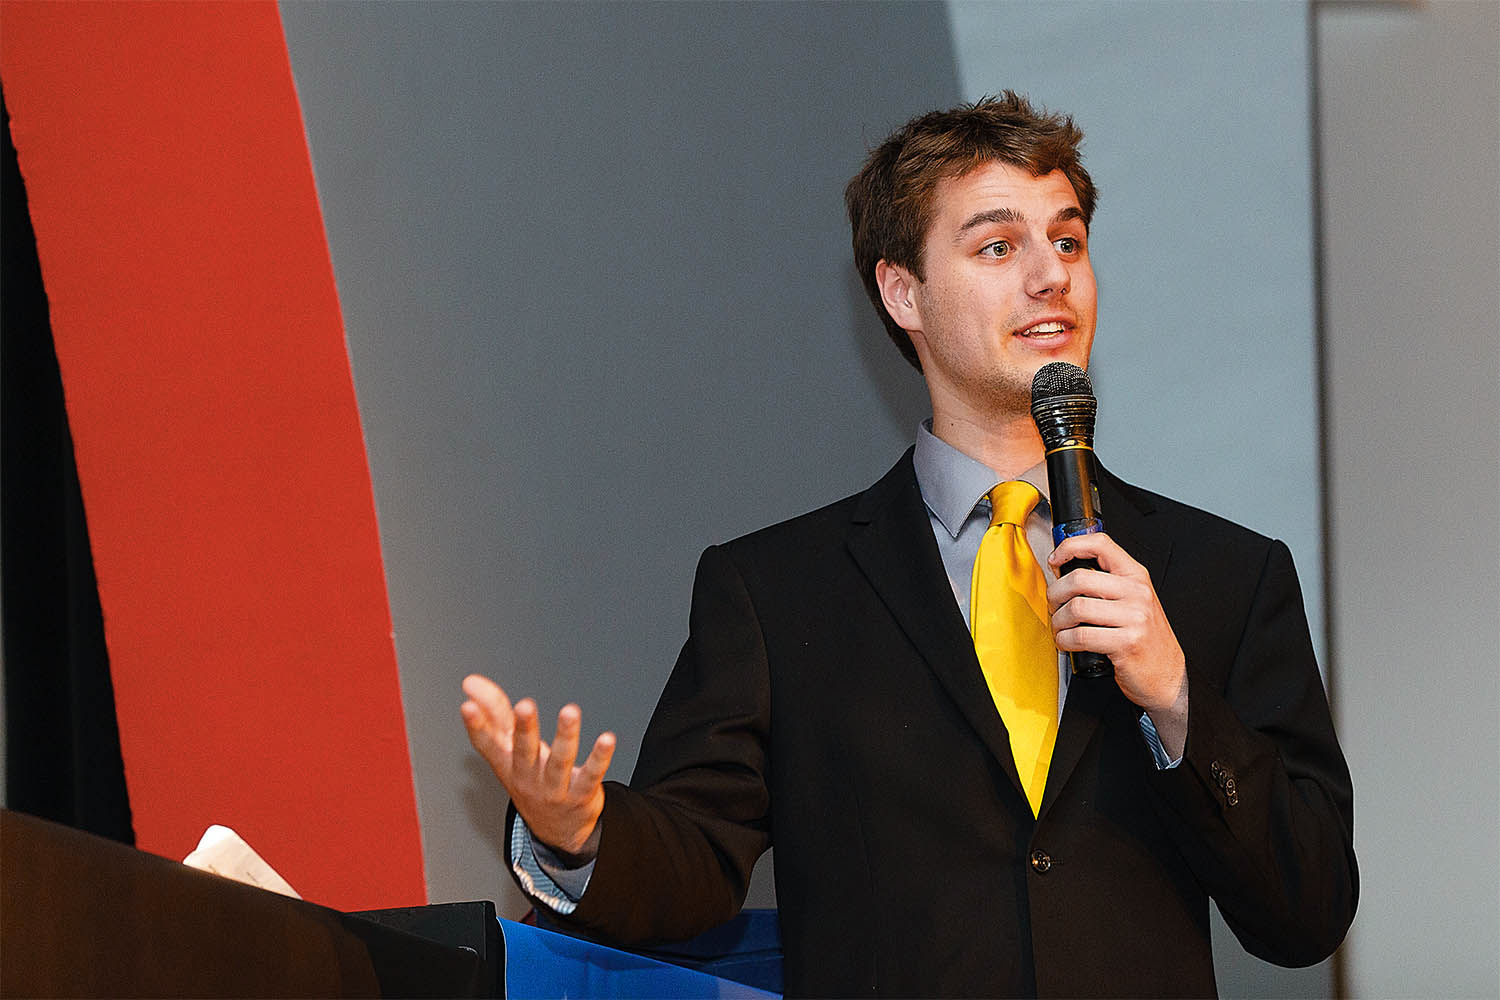 A young man on stage speaking into a microphone.